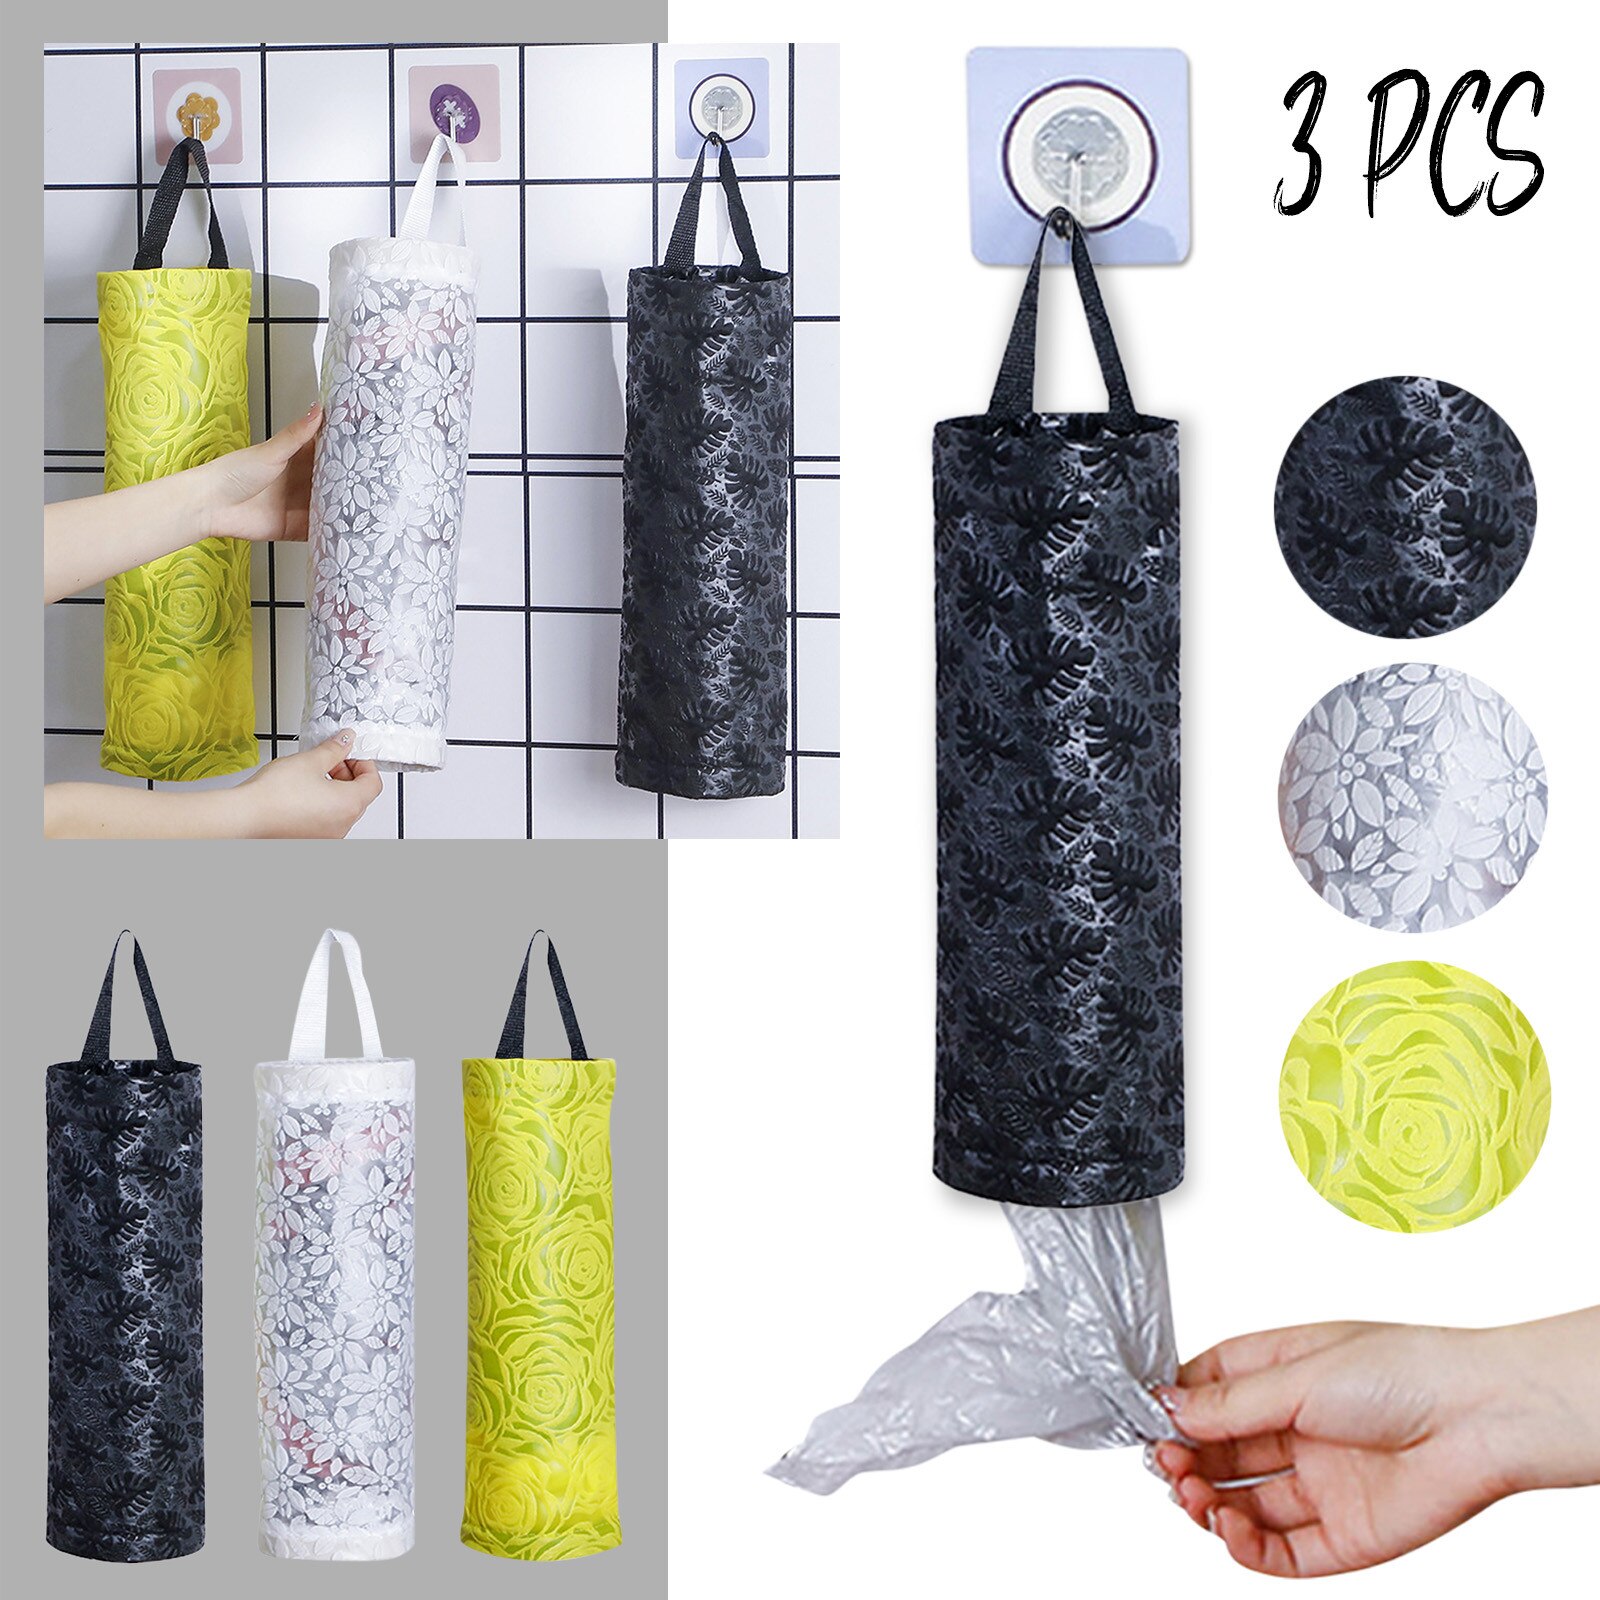 Kitchen Rubbish Bag Round Storage Bag Miscellaneous Wall Hanging Organizer Convenient Extraction Box Small Freezer Containers